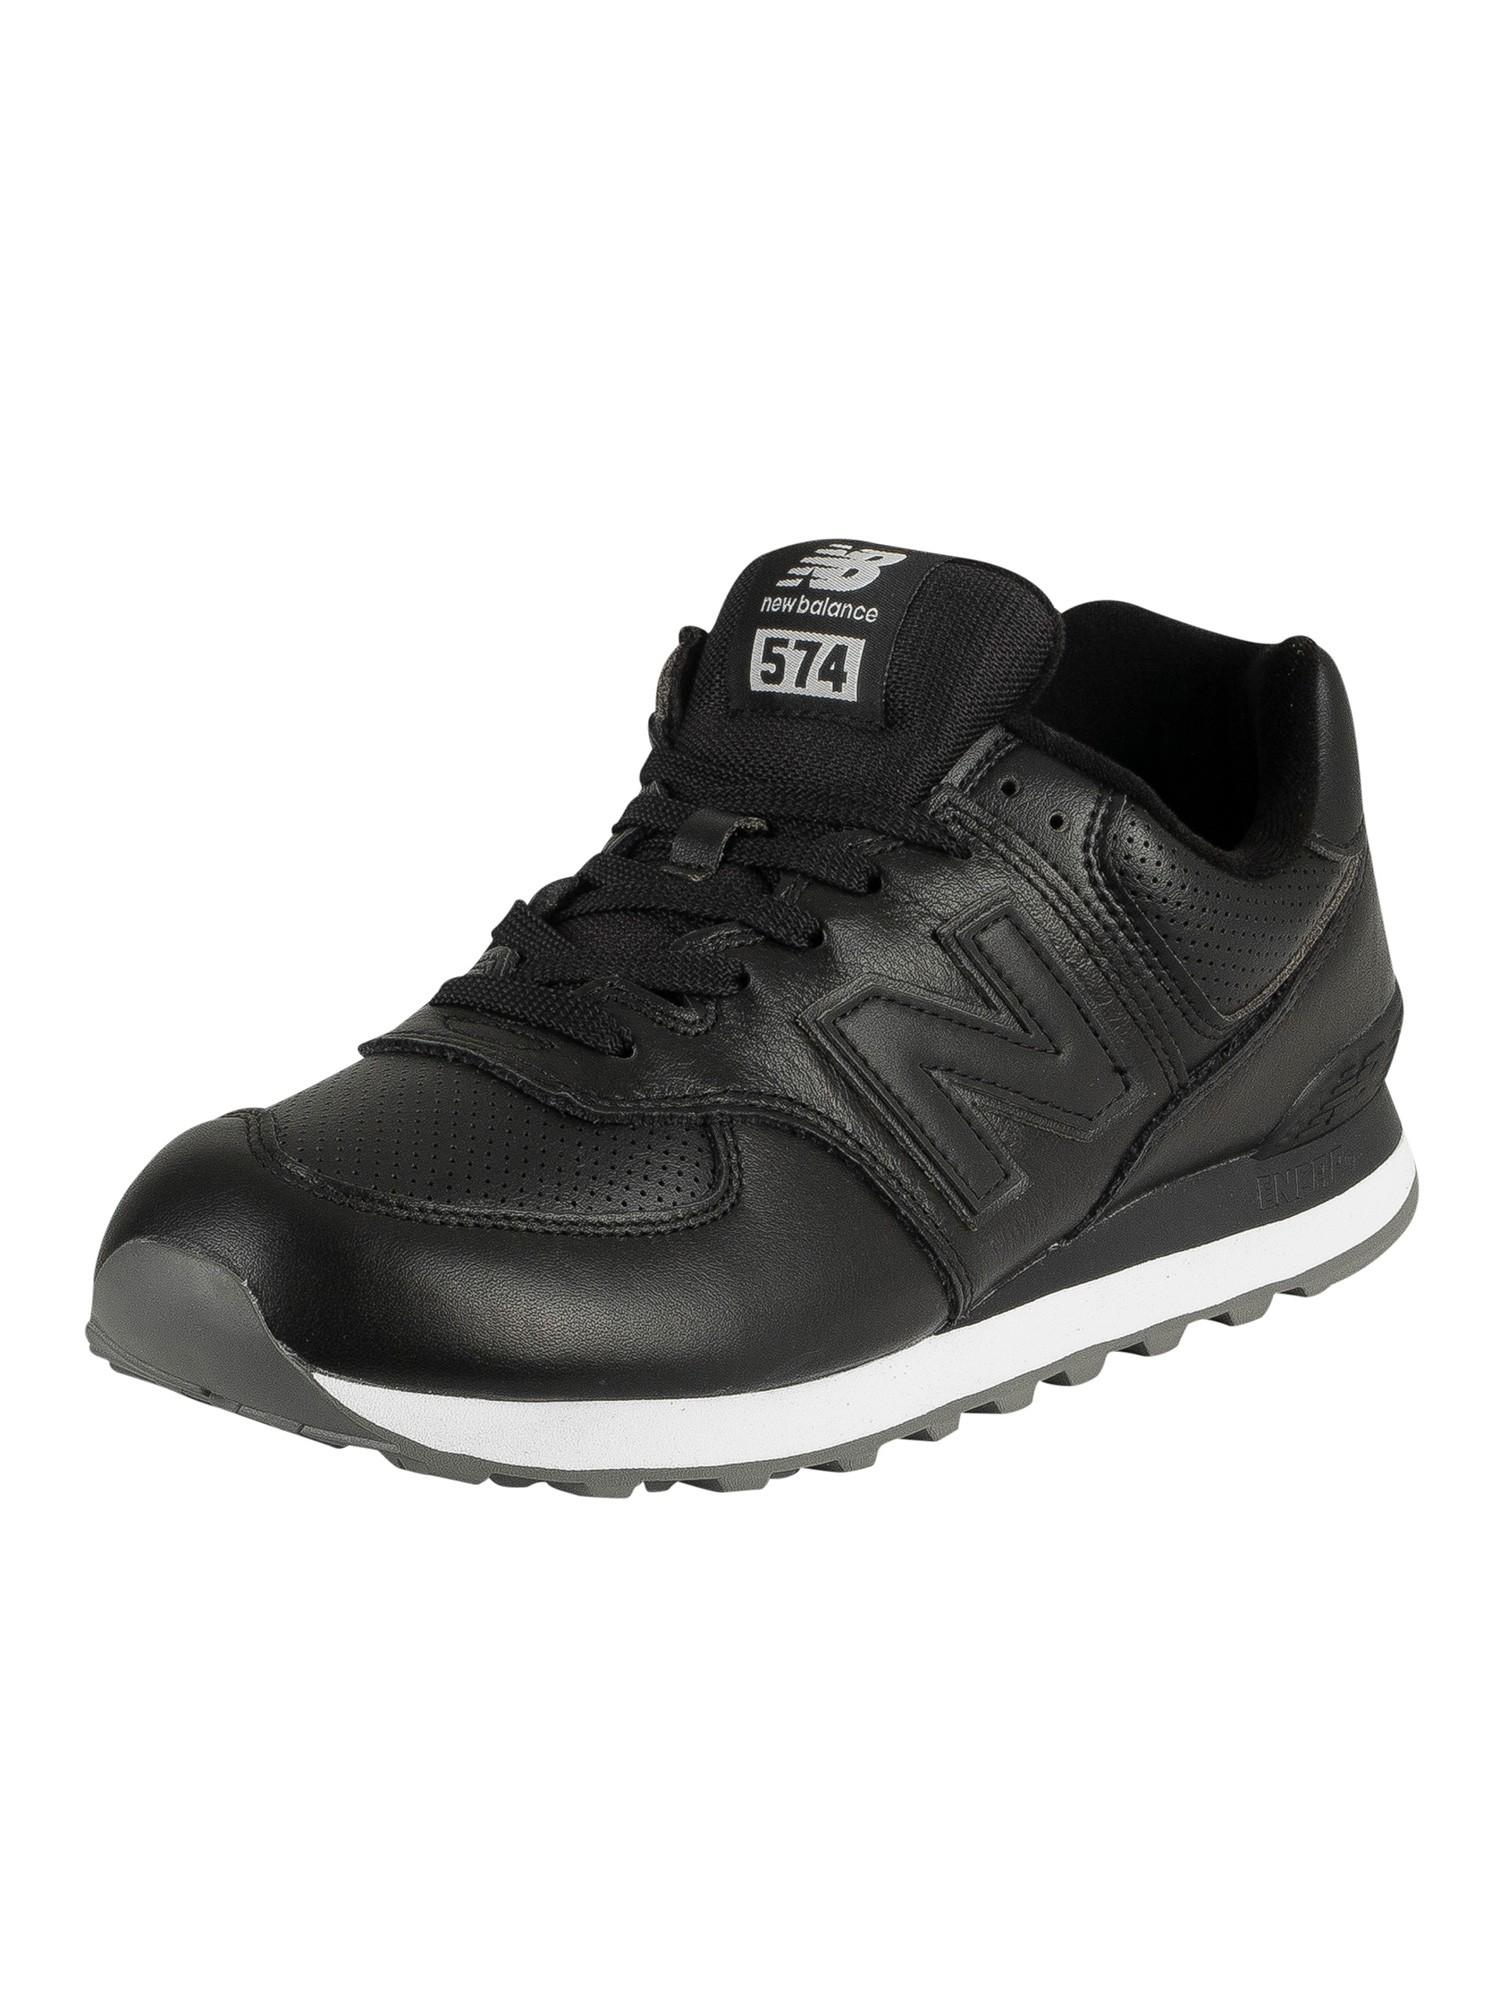 New Balance 574 Leather Trainers in 